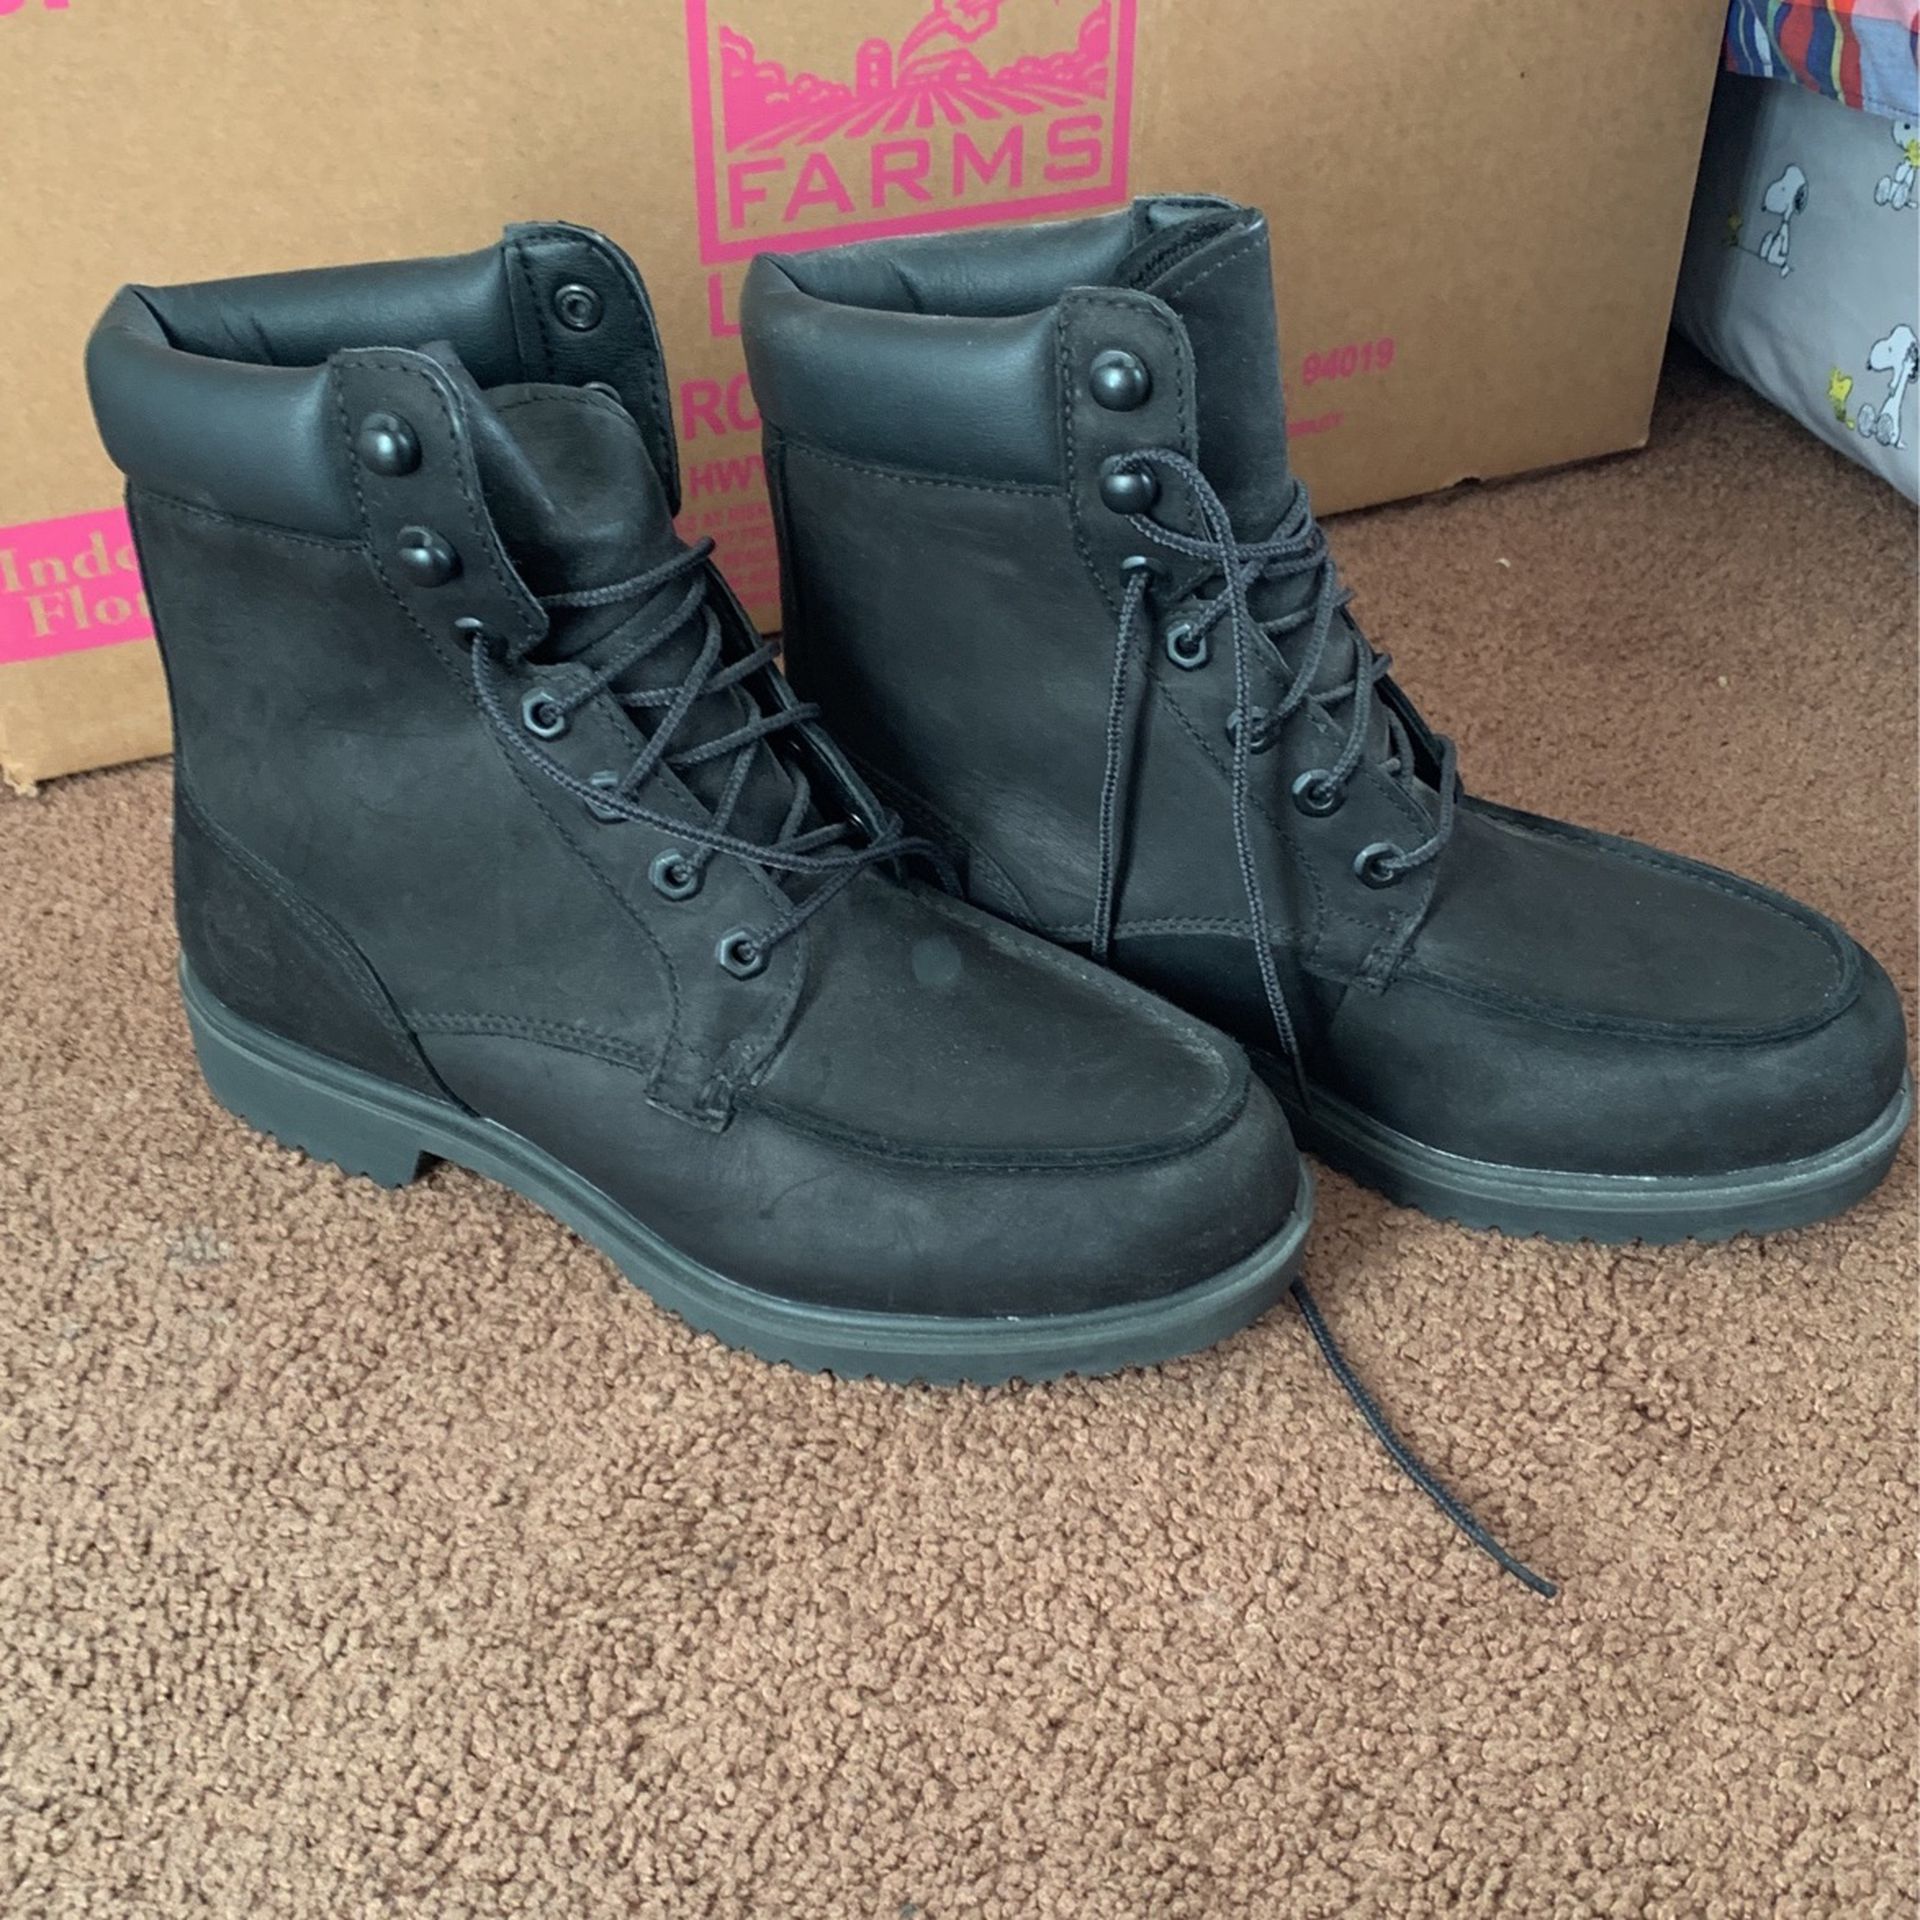 Timberland Ortholite Boots for Sale in Redwood City, CA - OfferUp